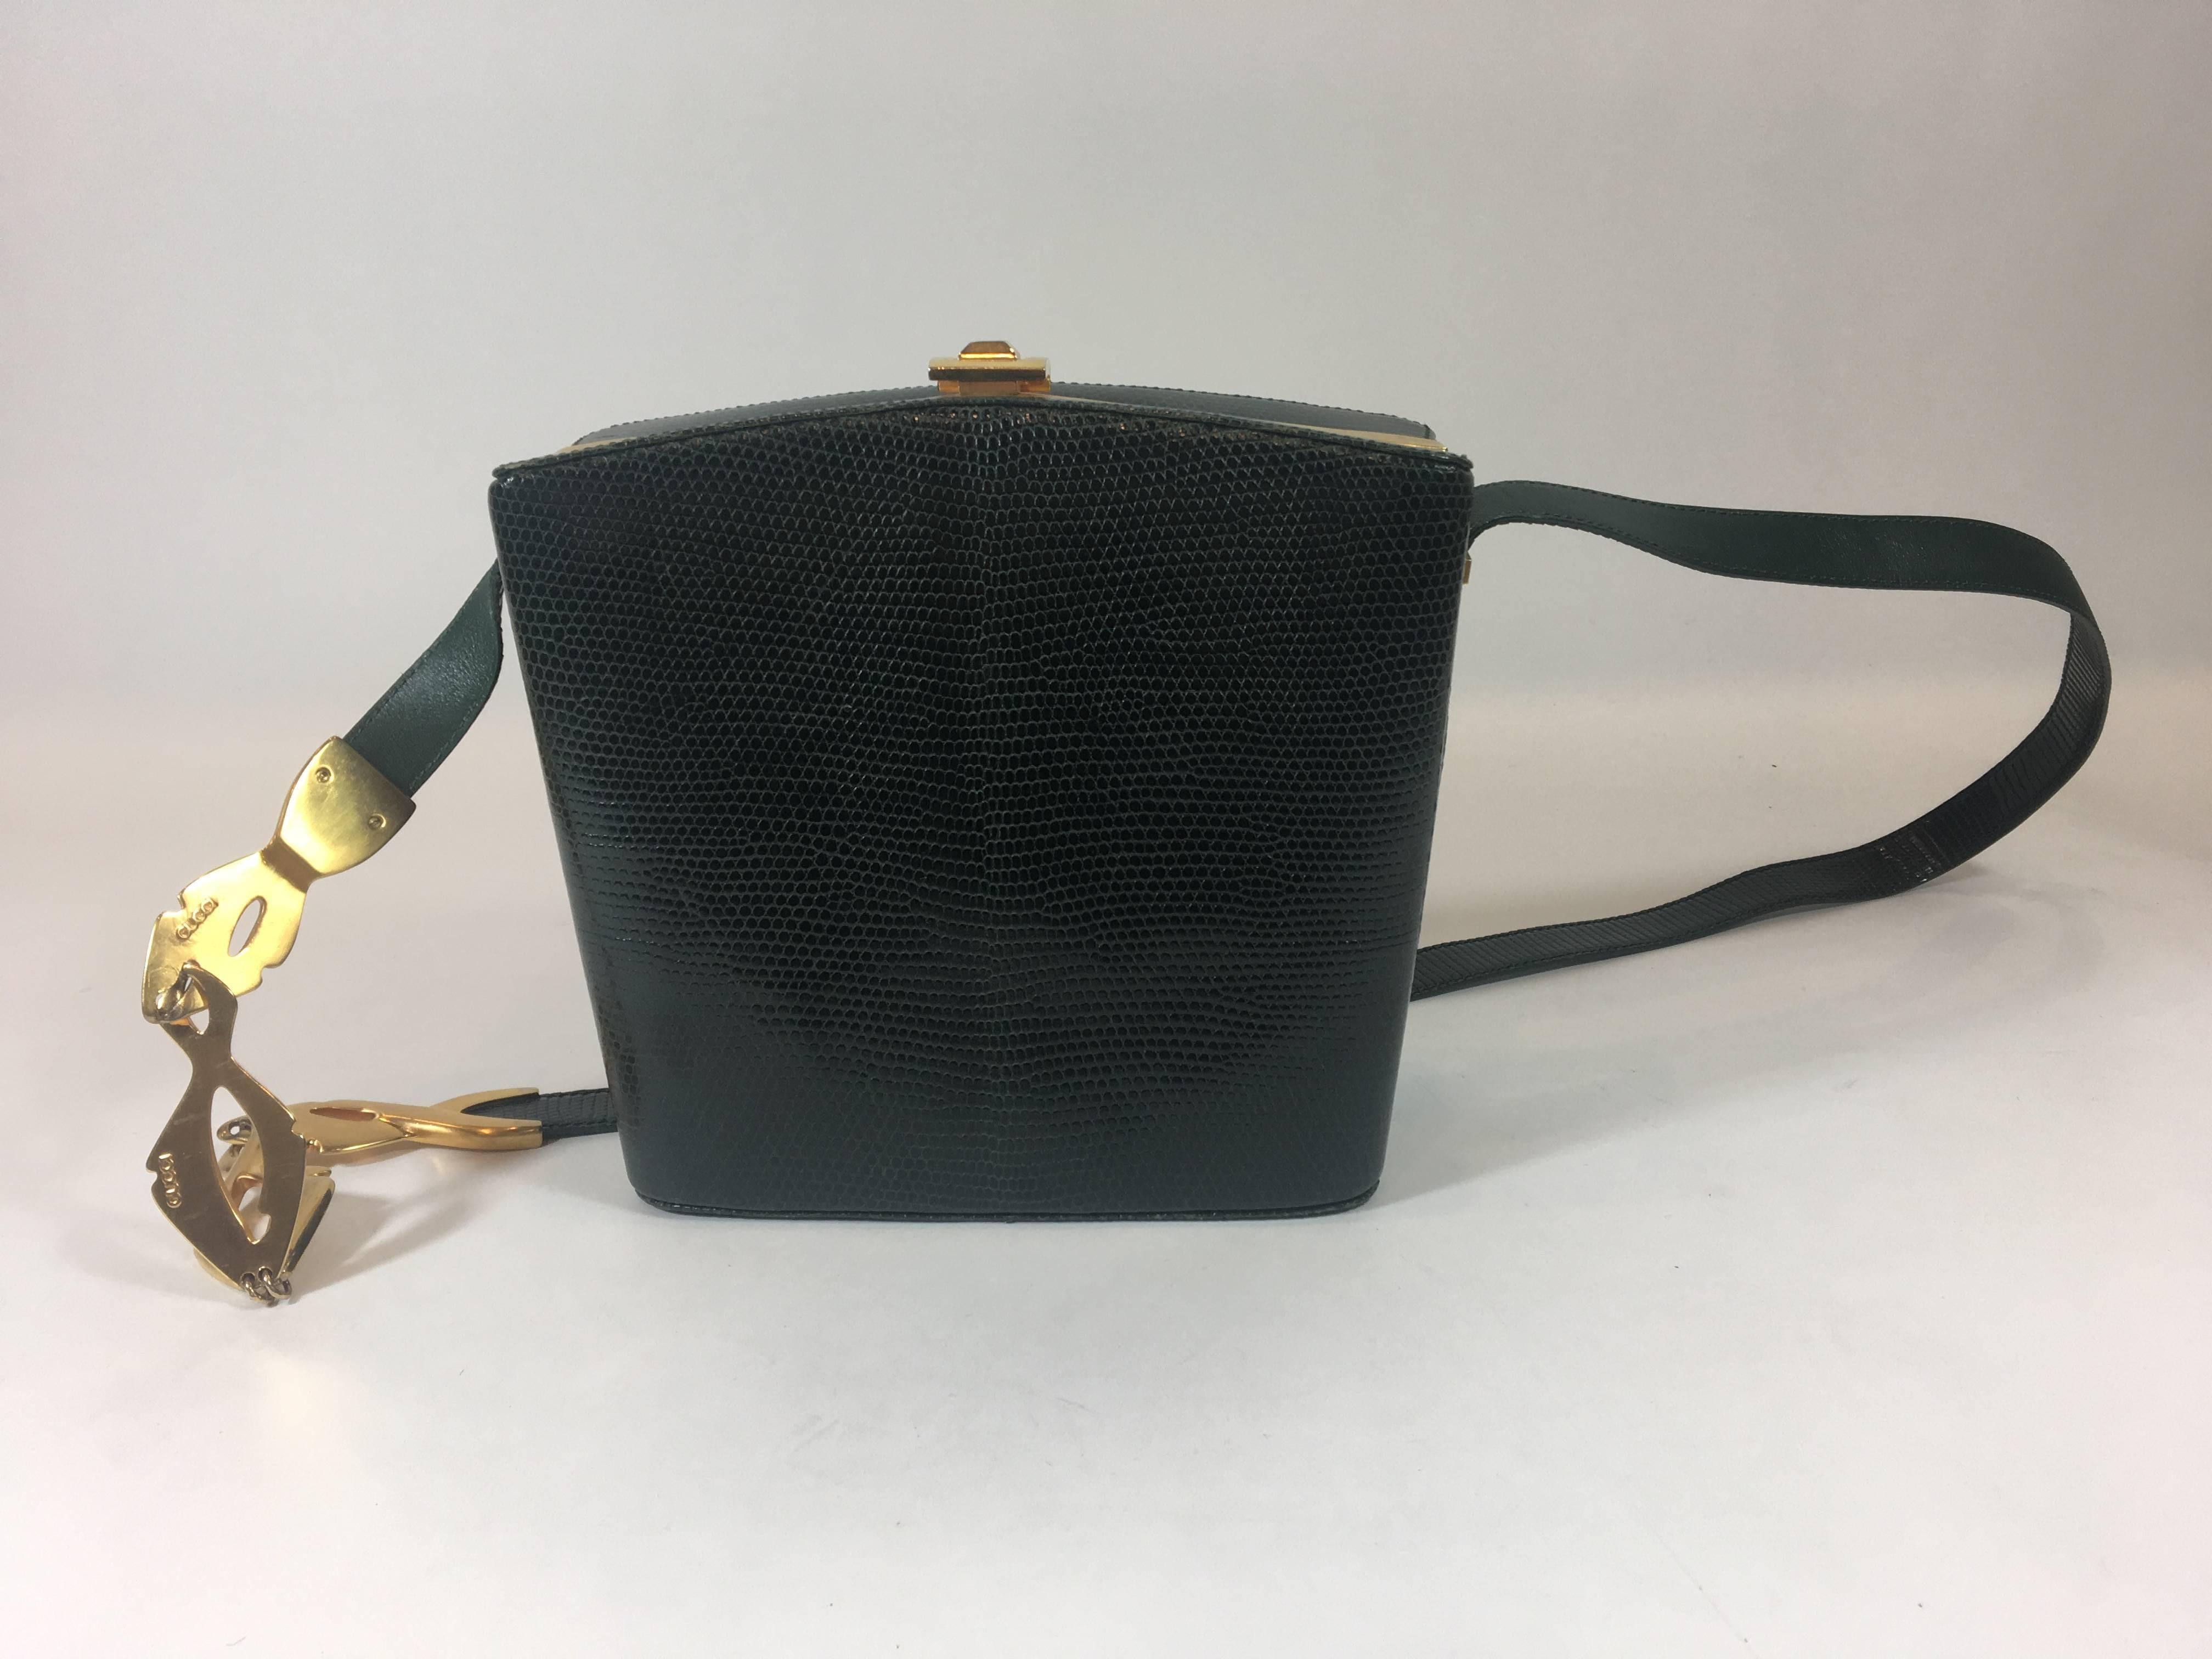 This vintage bag is made of green lizard with gold-tone hardware. Single leather strap with snap closure. Taupe suede interior with dual compartments. Includes one zipper compartment.

Retail Price: $1750